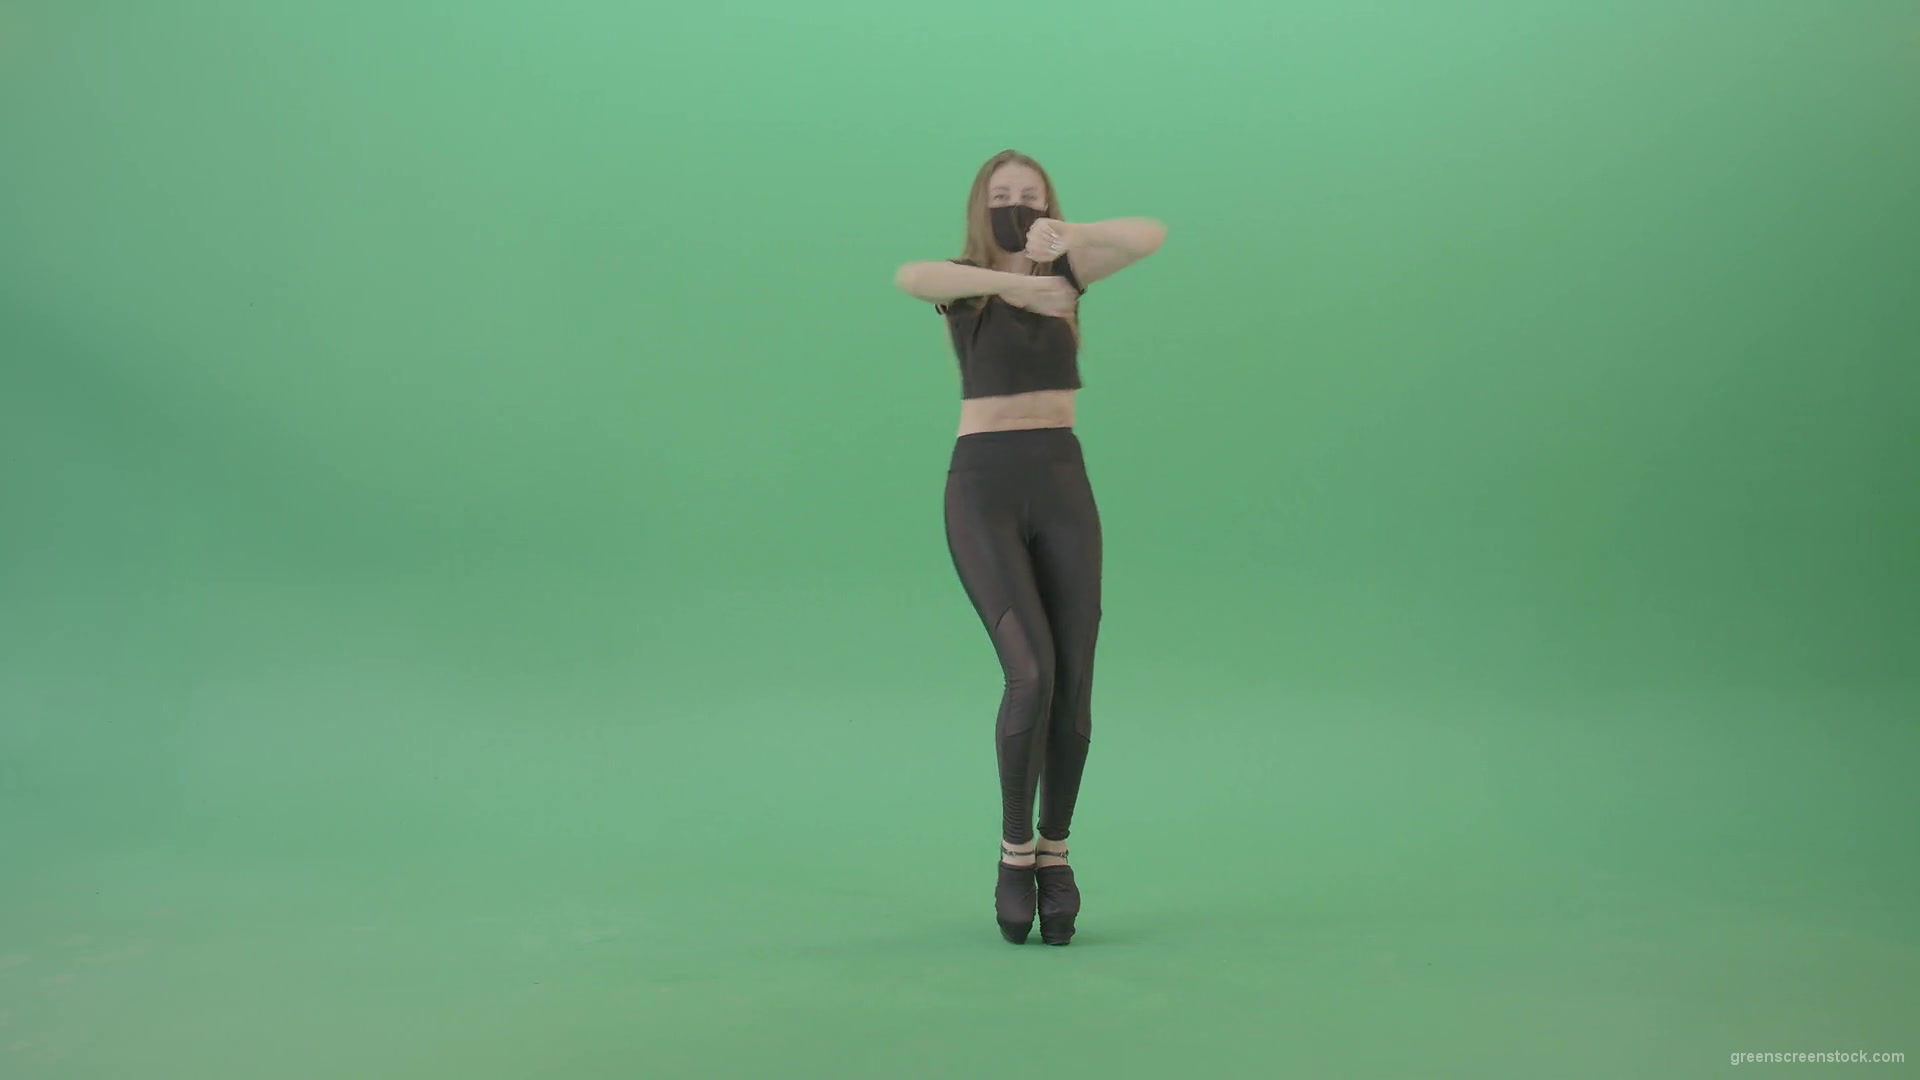 Sexy-girl-in-black-mask-and-costume-dancing-with-erotic-moves-isolated-on-green-screen-4K-video-footage-1920_004 Green Screen Stock